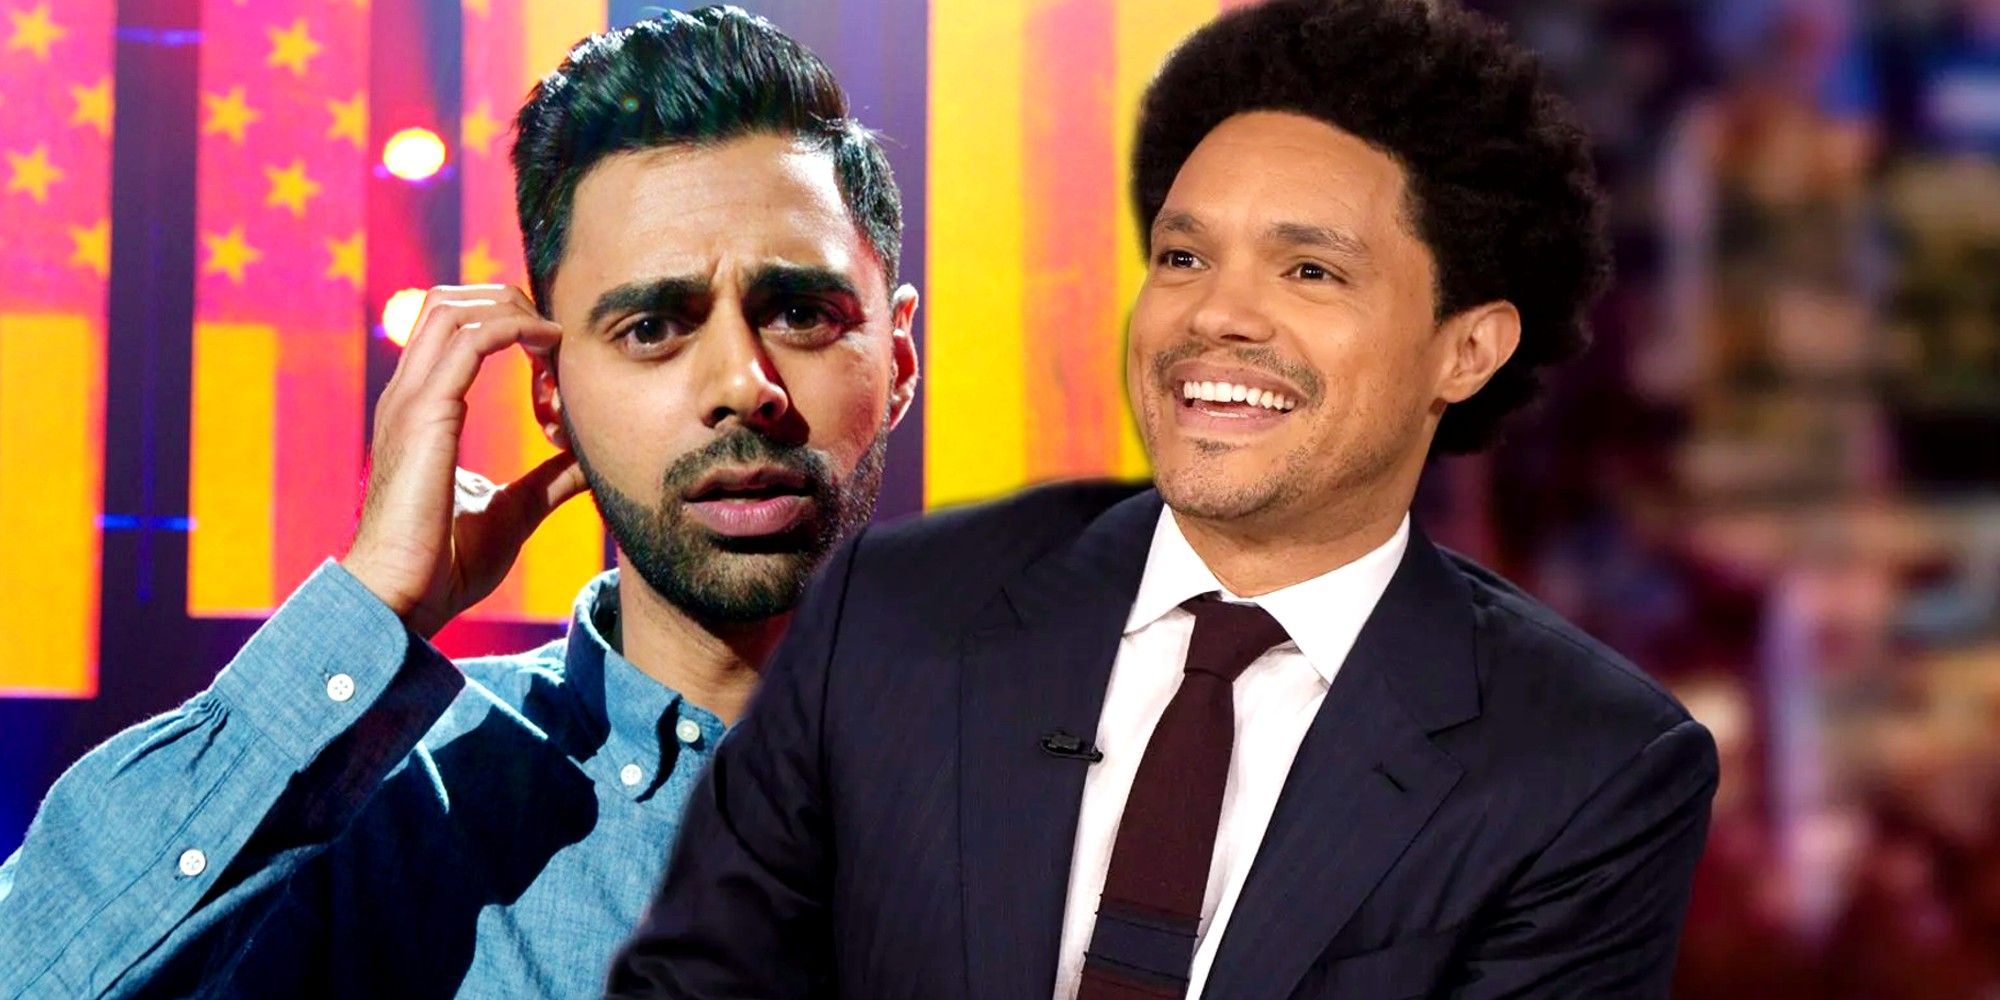 Custom image of Hasan Minhaj in the Patriot Act and Trevor Noah in the Daily Show